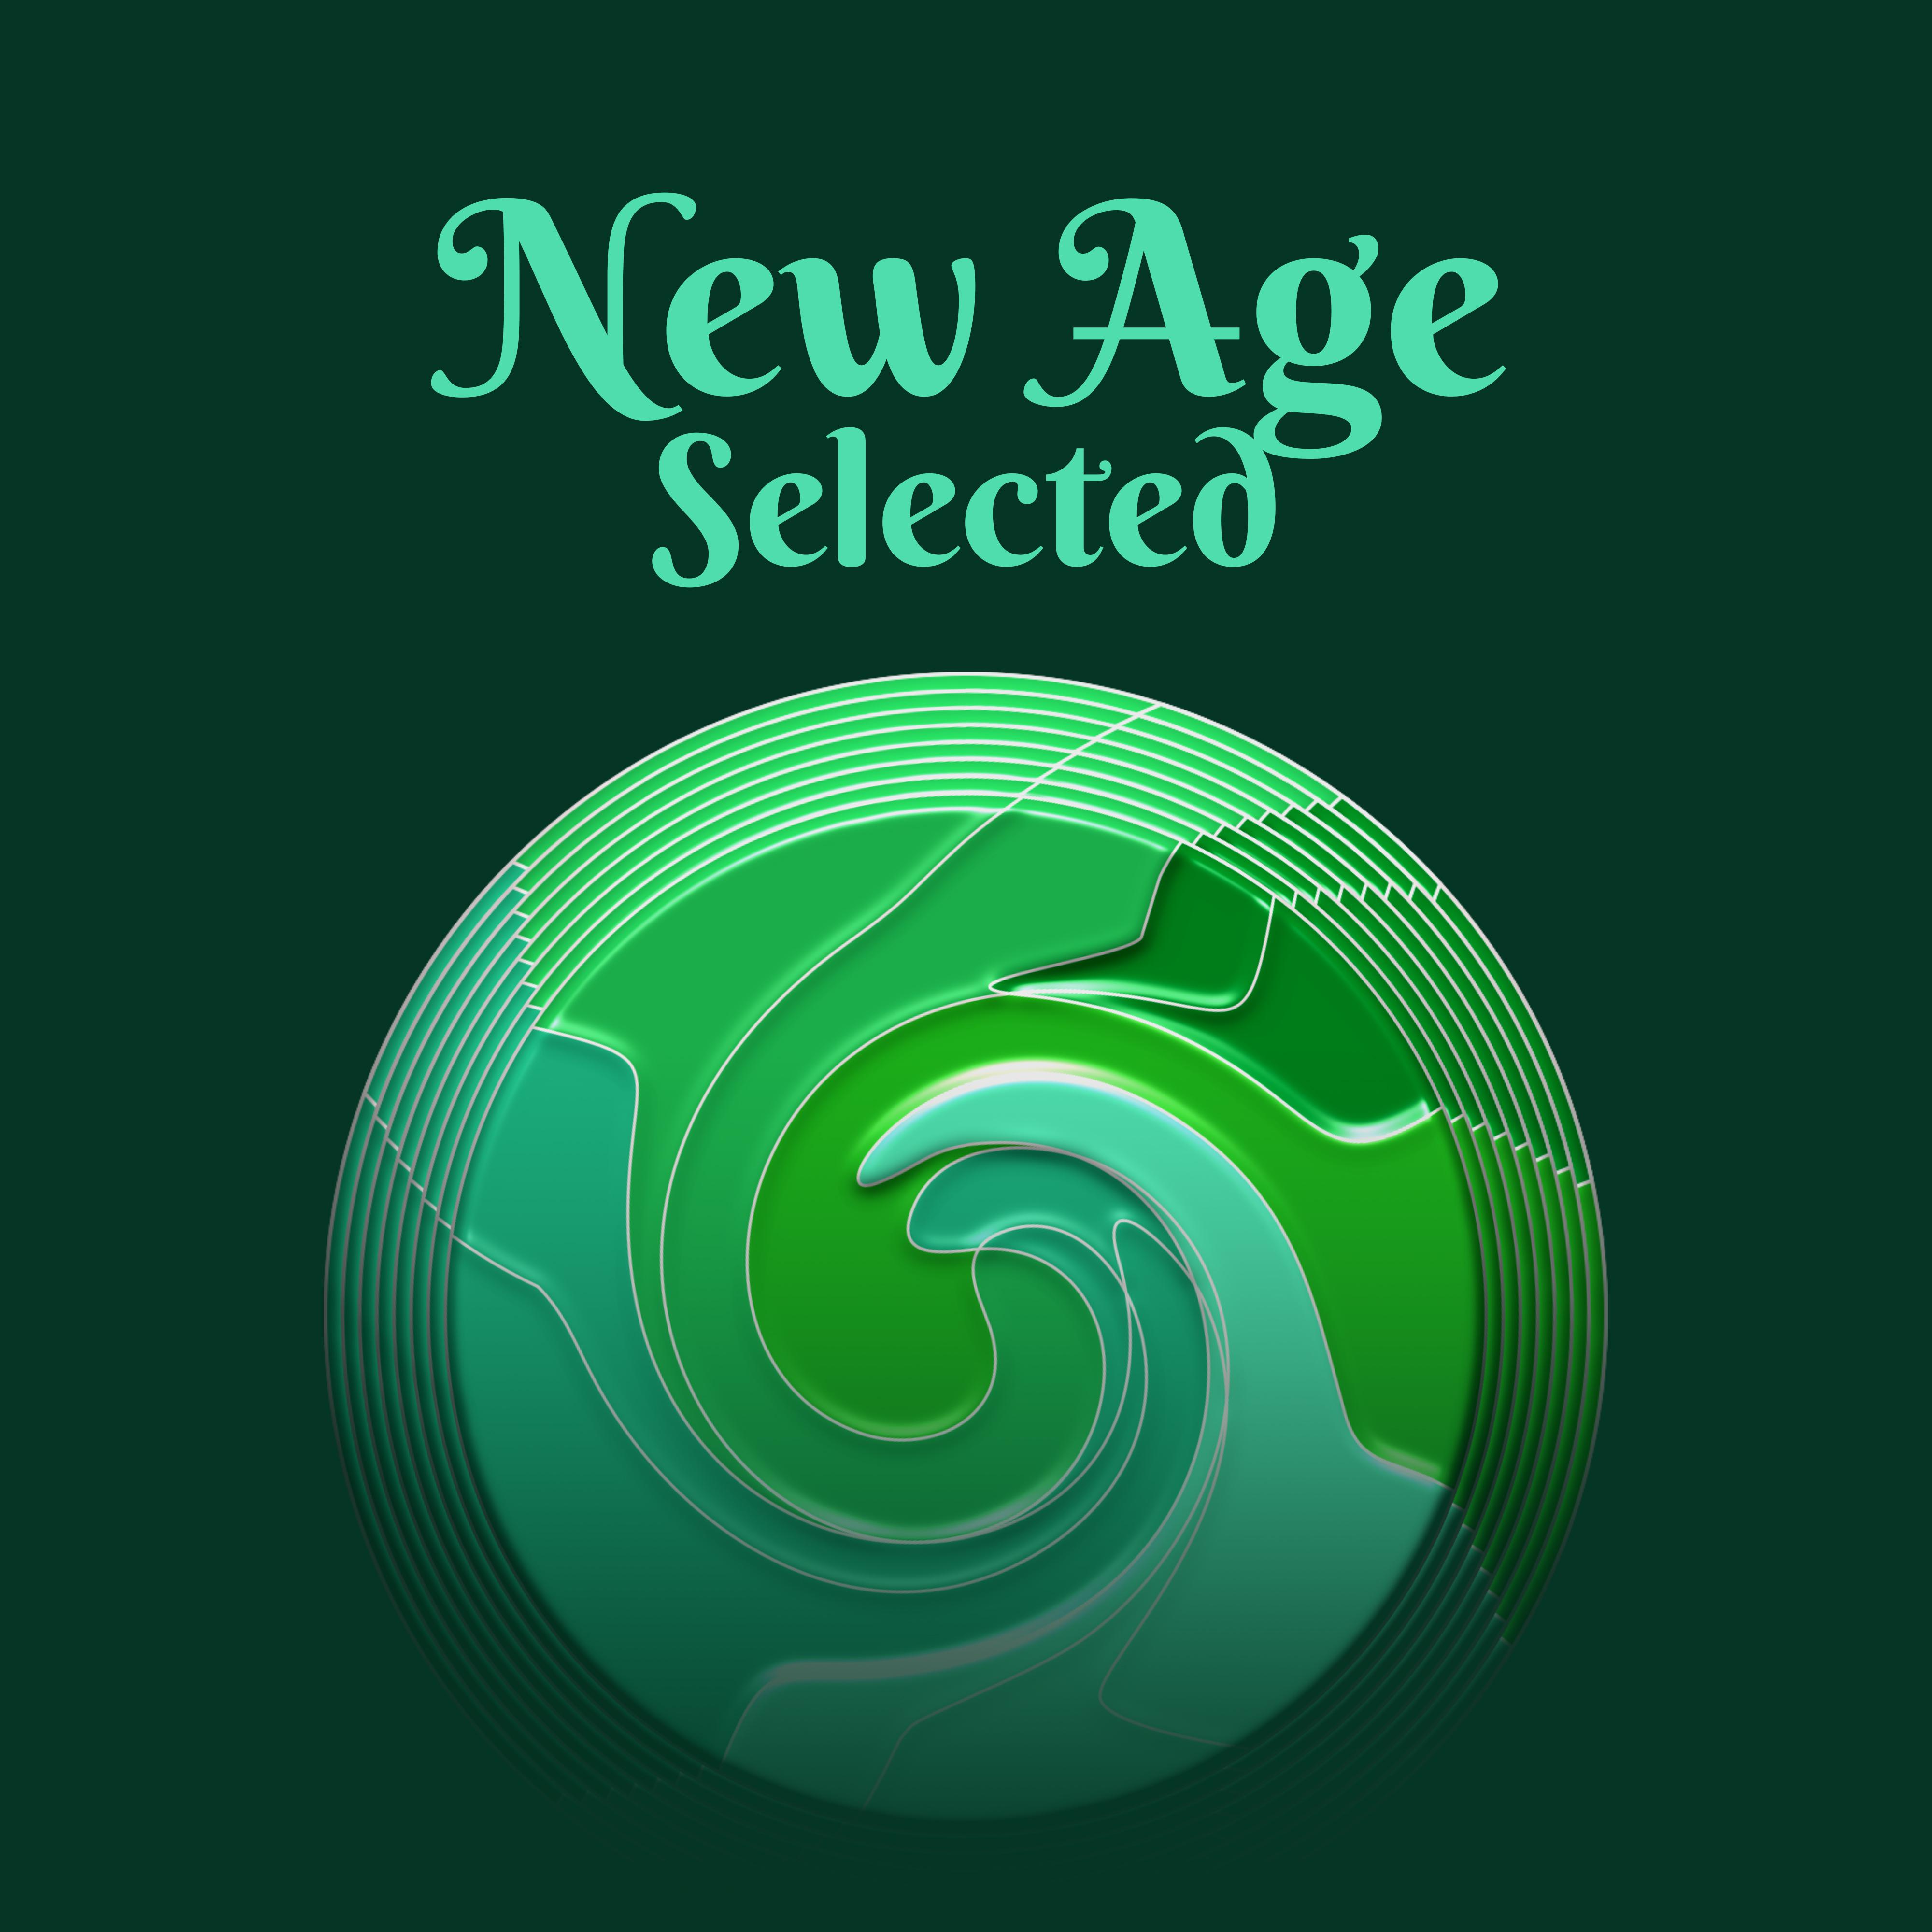 New Age Selected – Calming Nature Sounds, Healing Music Therapy, Pure Relaxation, Zen, Stress Relief, Rest